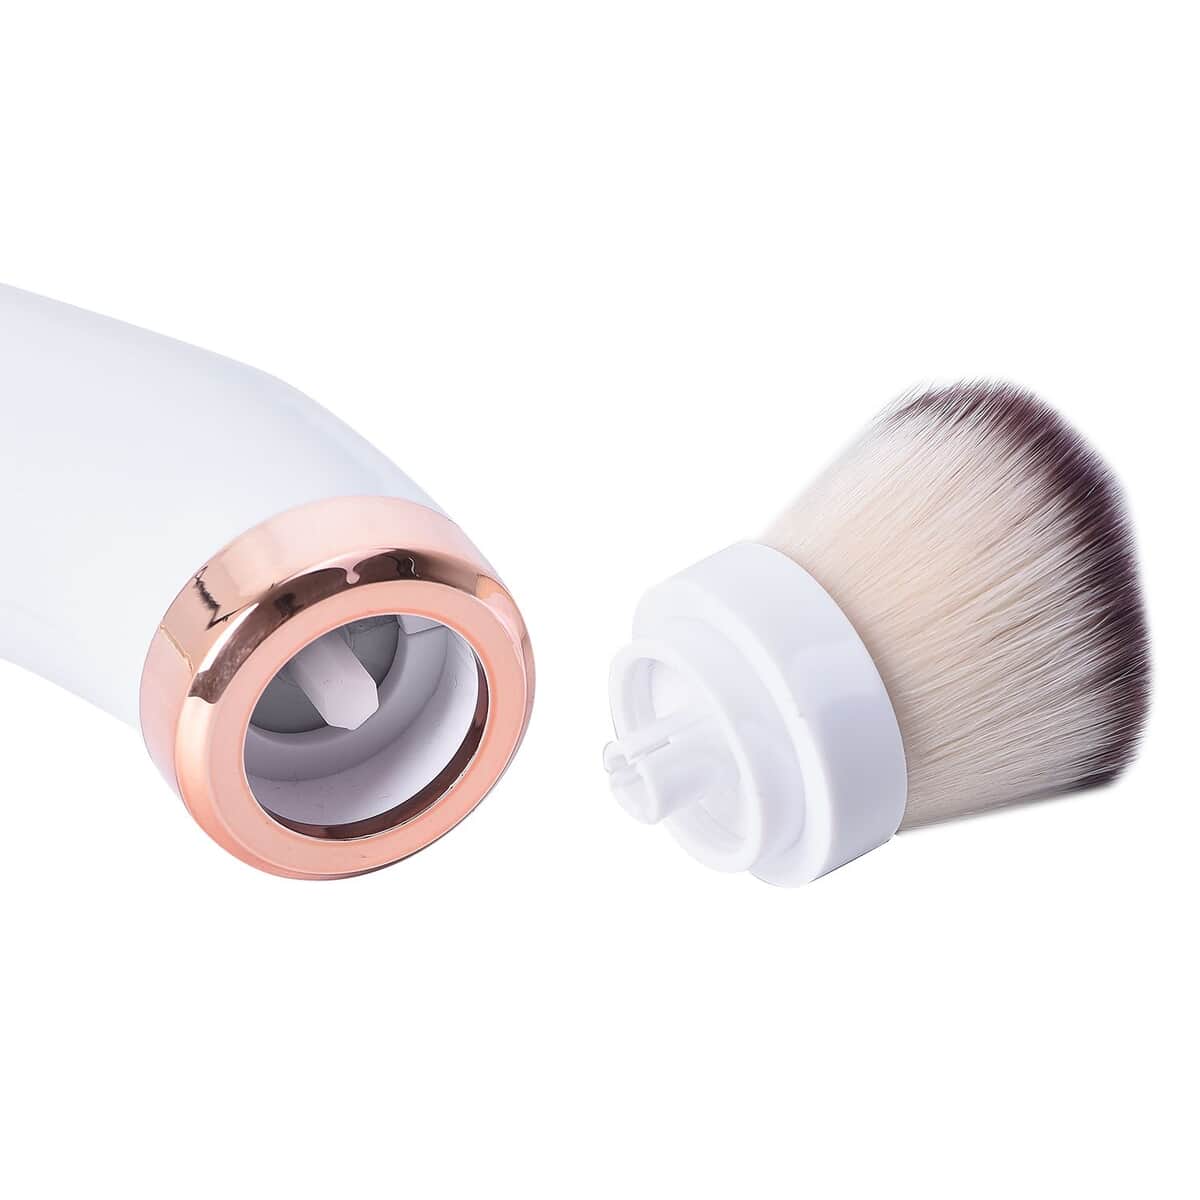 Power Spin Makeup Brush with 2 Interchangeable Brush Heads image number 3